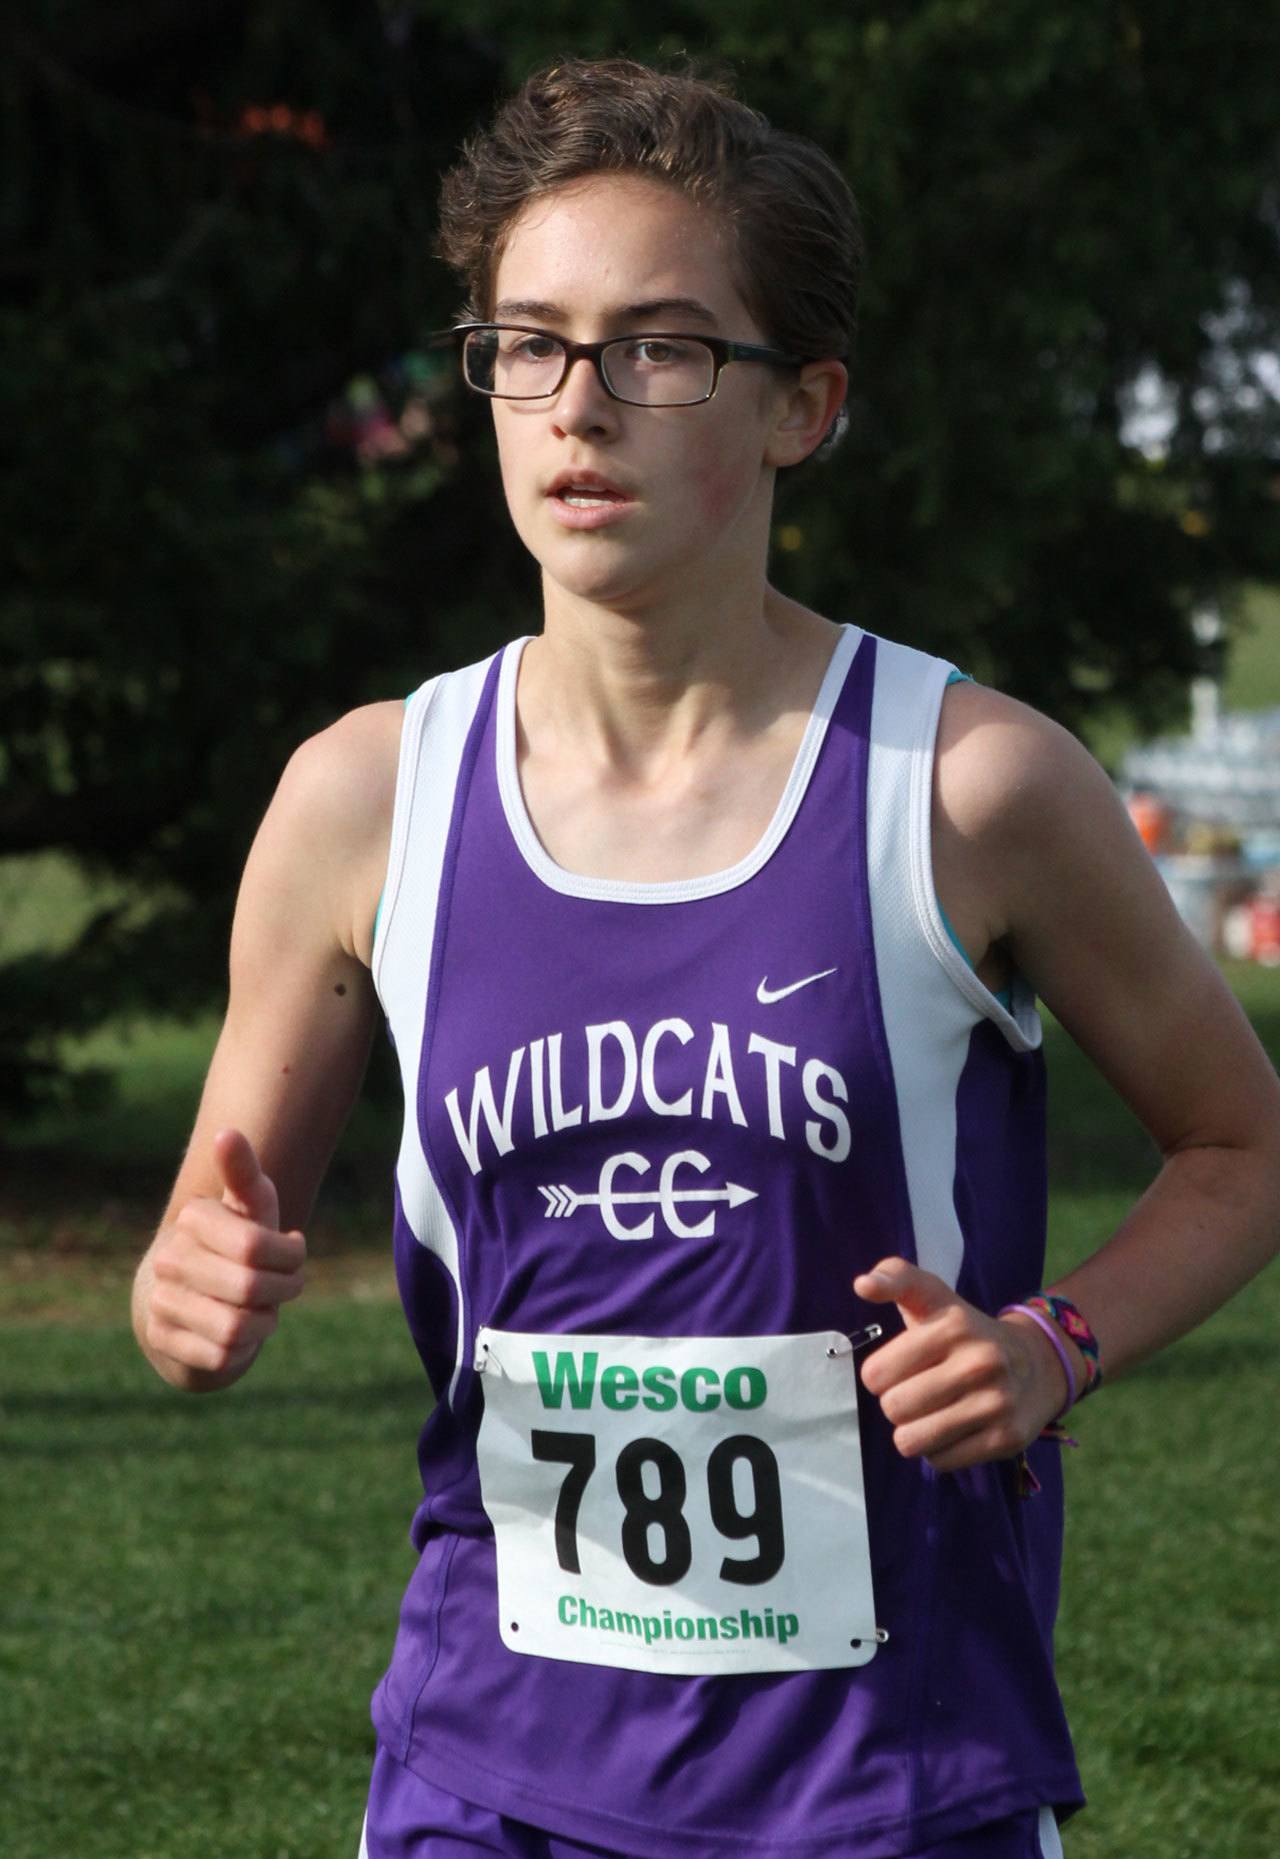 Megan Smith’s improvement from the league meet helped her earn a trip to state. (Photo by Jim Waller)